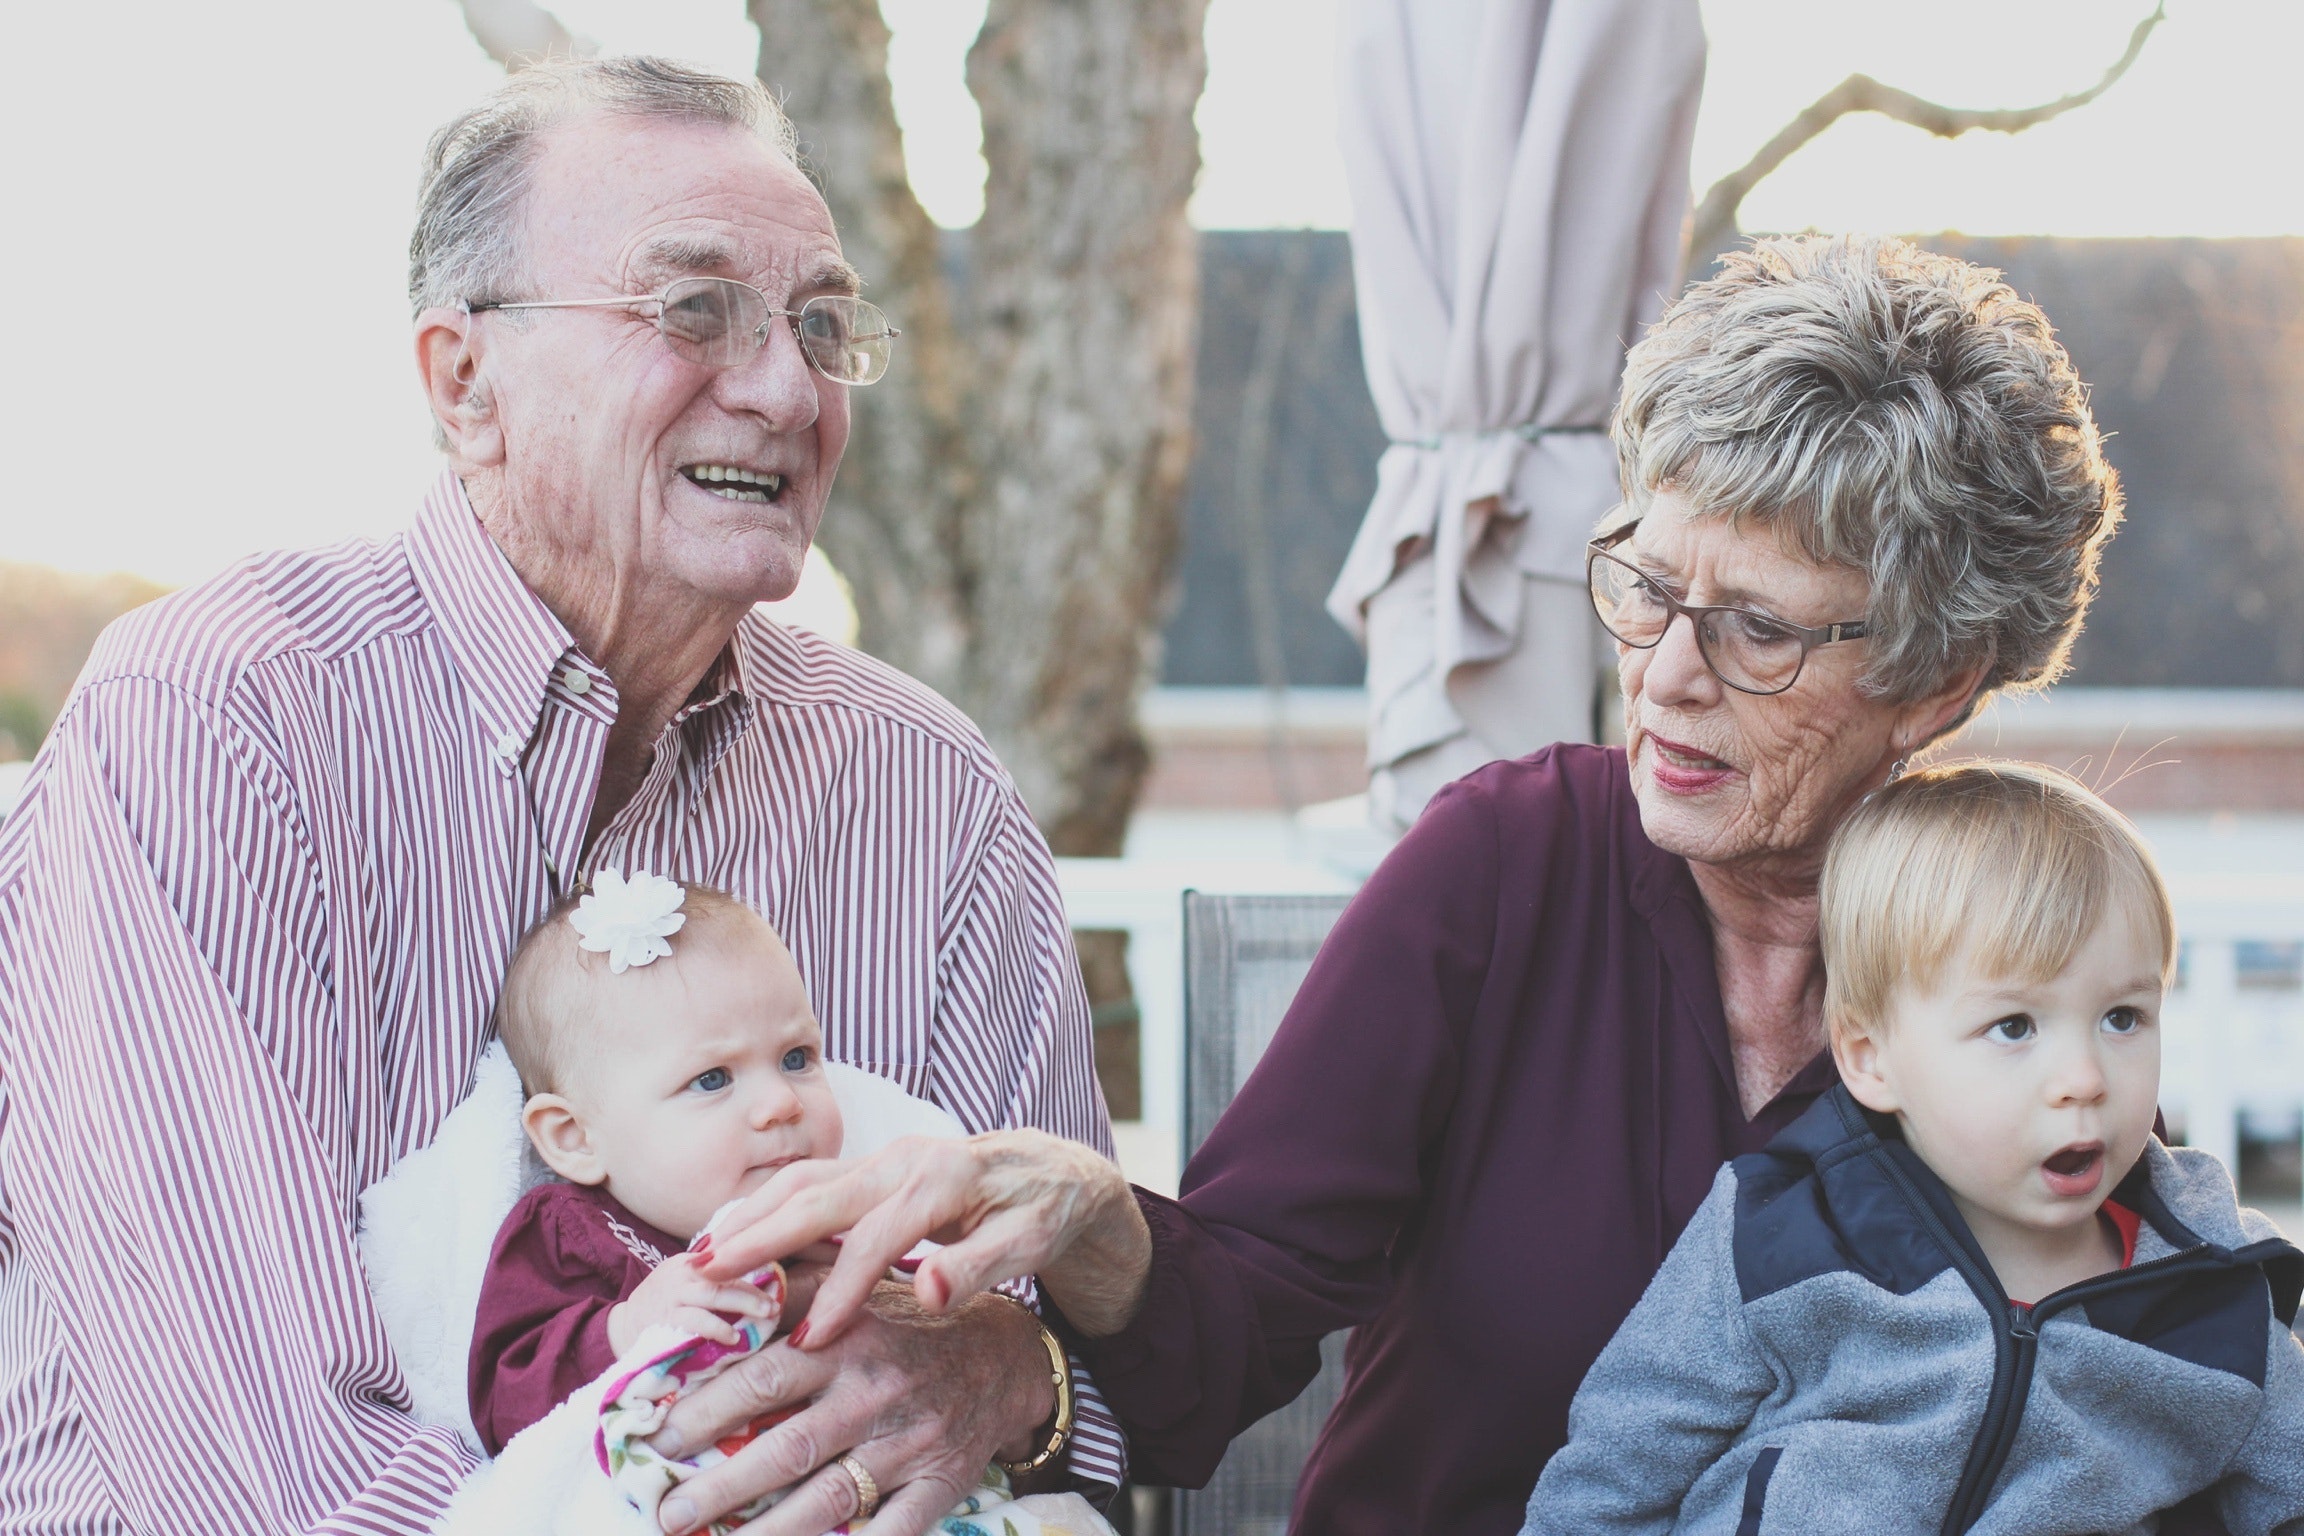 Preparing Children to Visit a Care Home: A Guide for Parents